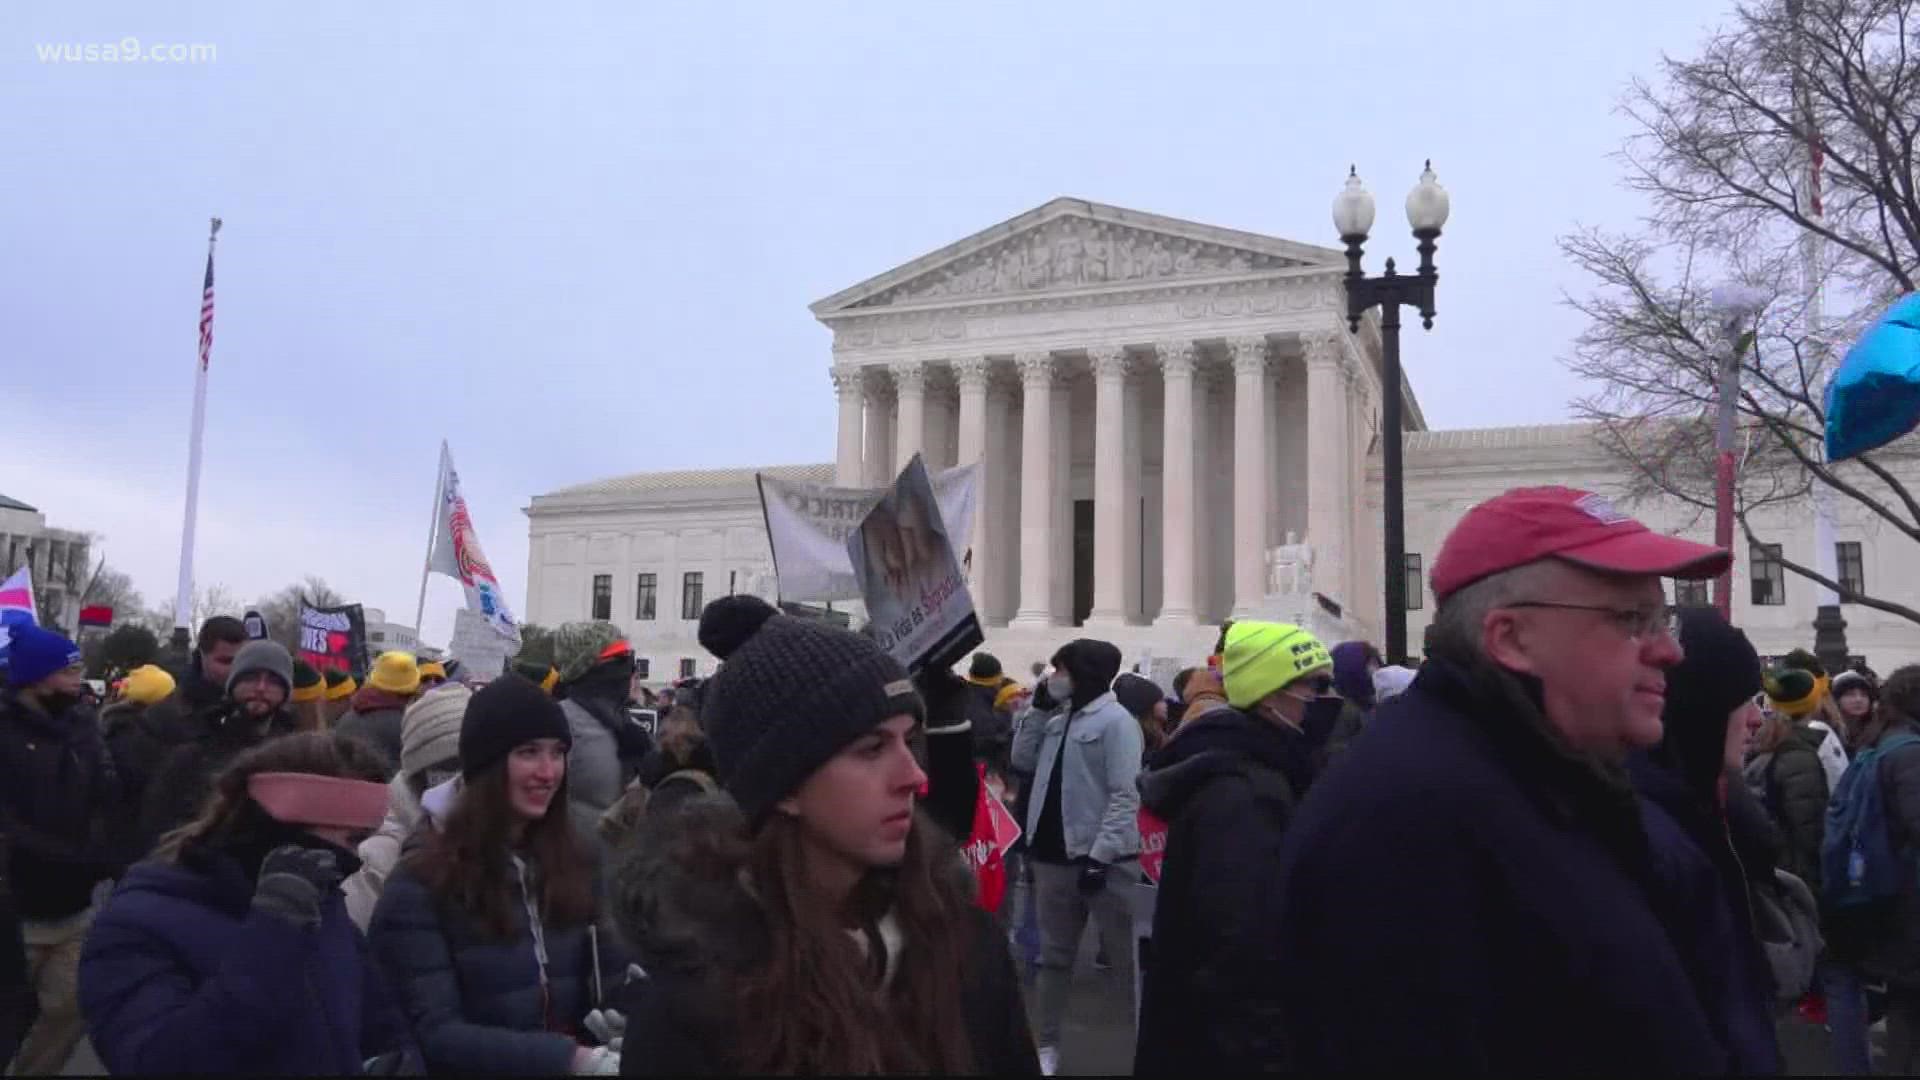 The Supreme Court is expected to deliver a decision in June that could overturn Roe v. Wade.